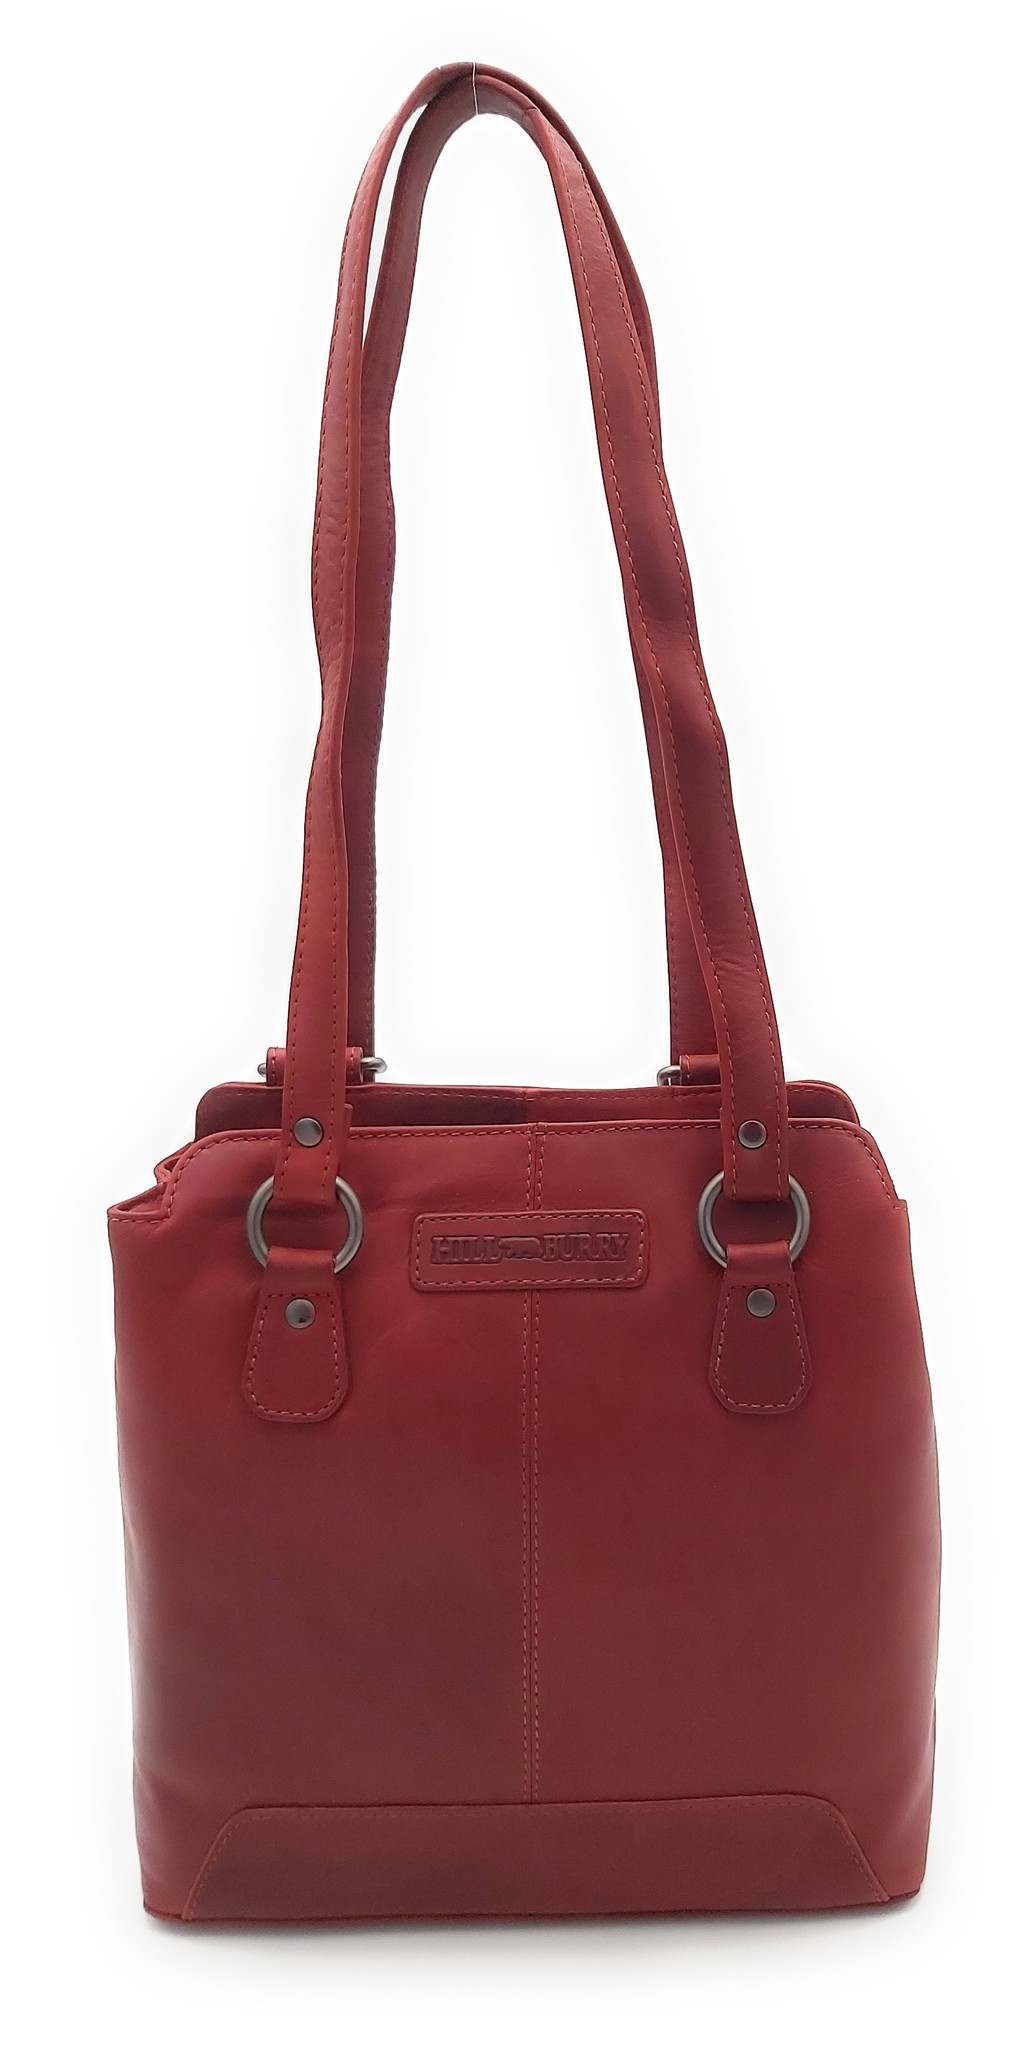 Hill Burry - VB100208 - 4065 - genuine leather - ladies Backpack and shoulder bag - sturdy - chic - appearance - vintage leather - Red